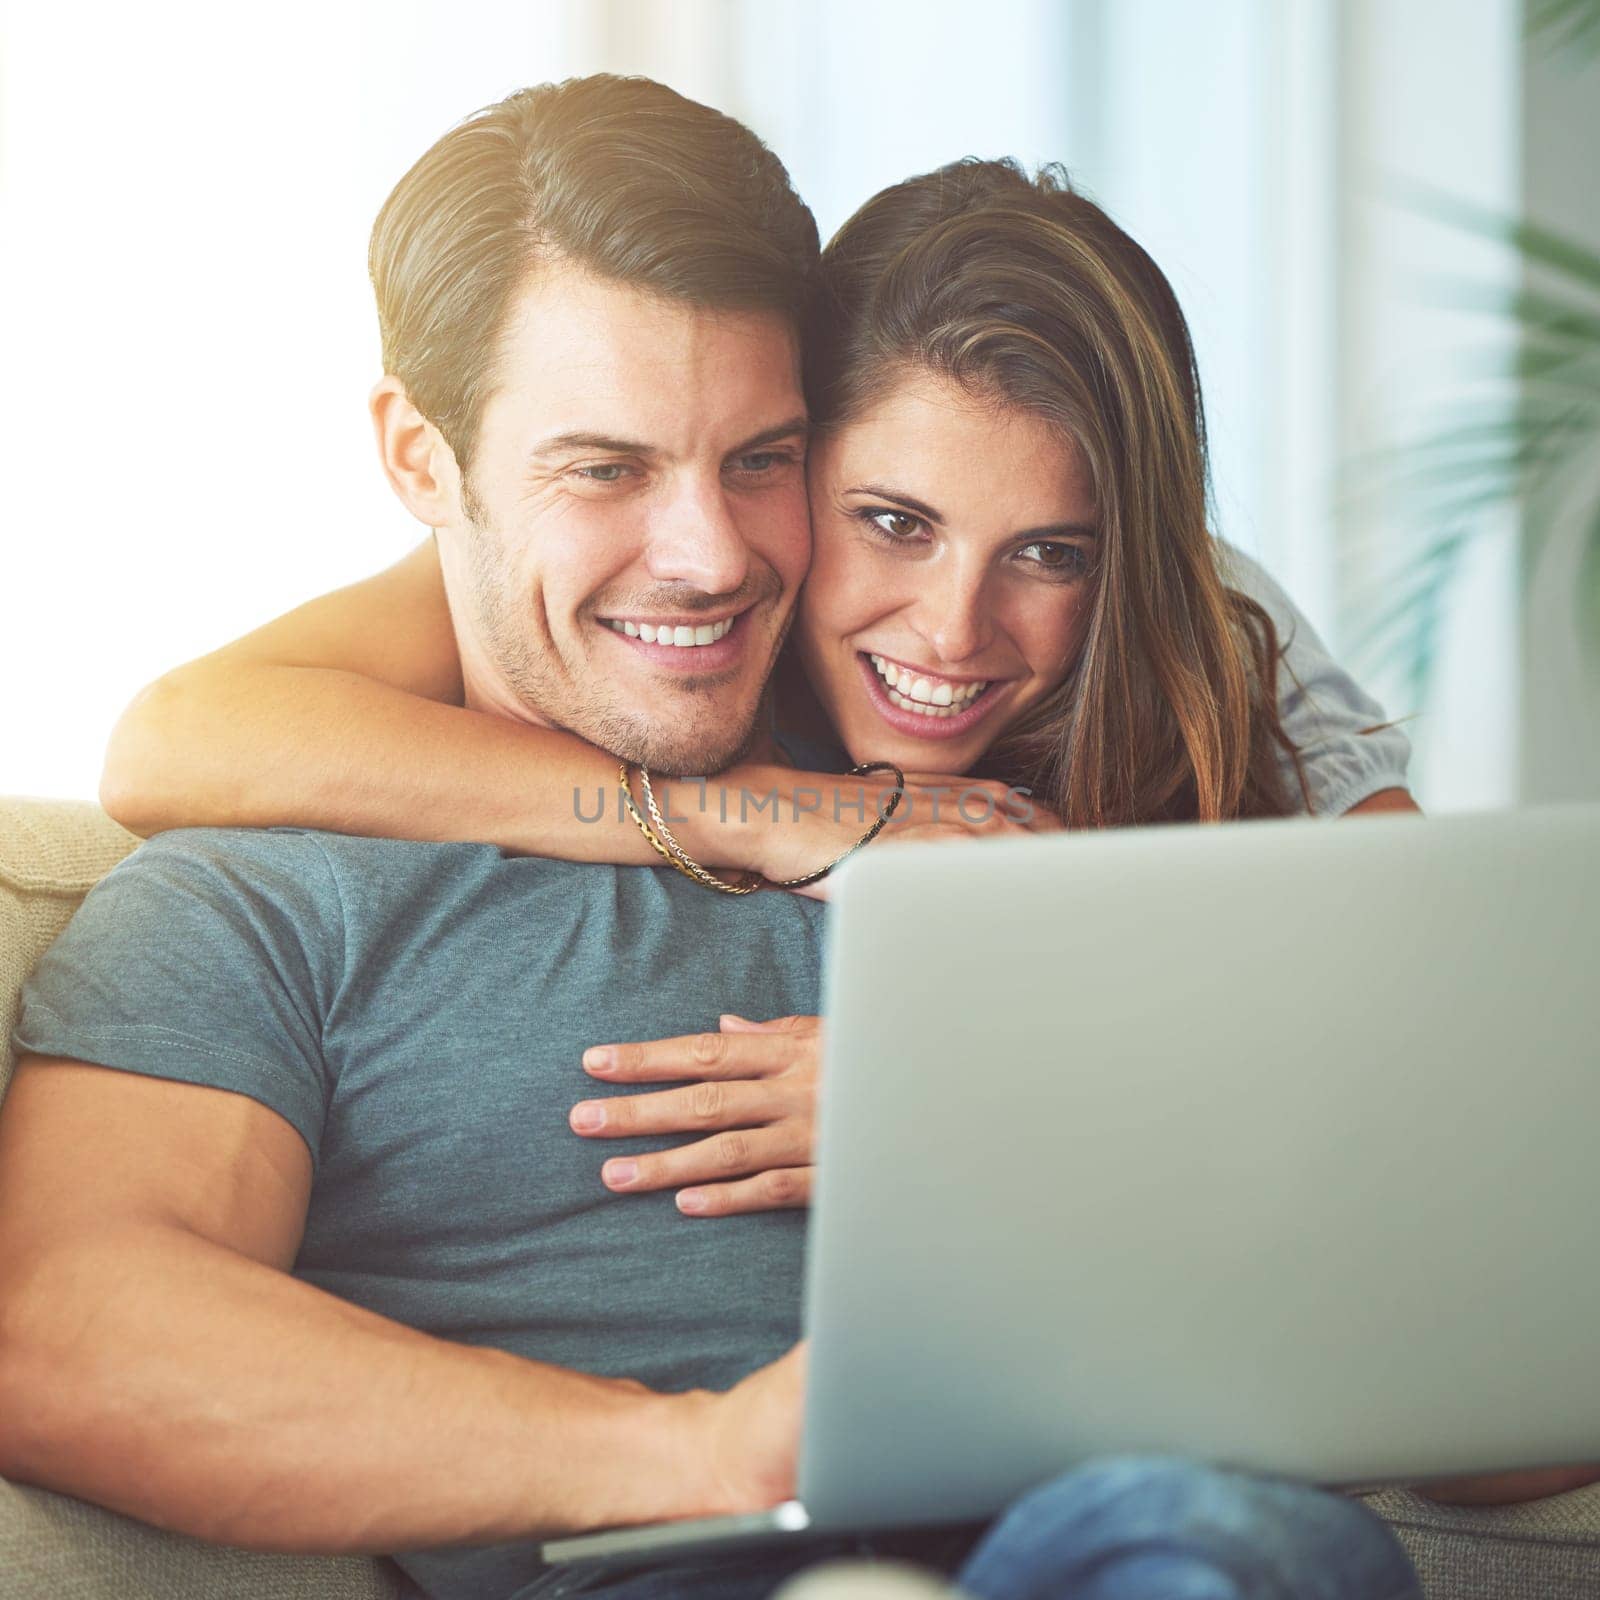 Laptop, happy and woman embracing man on sofa networking on social media, website or internet. Smile, love and female person hugging husband reading online blog with computer in living room at home